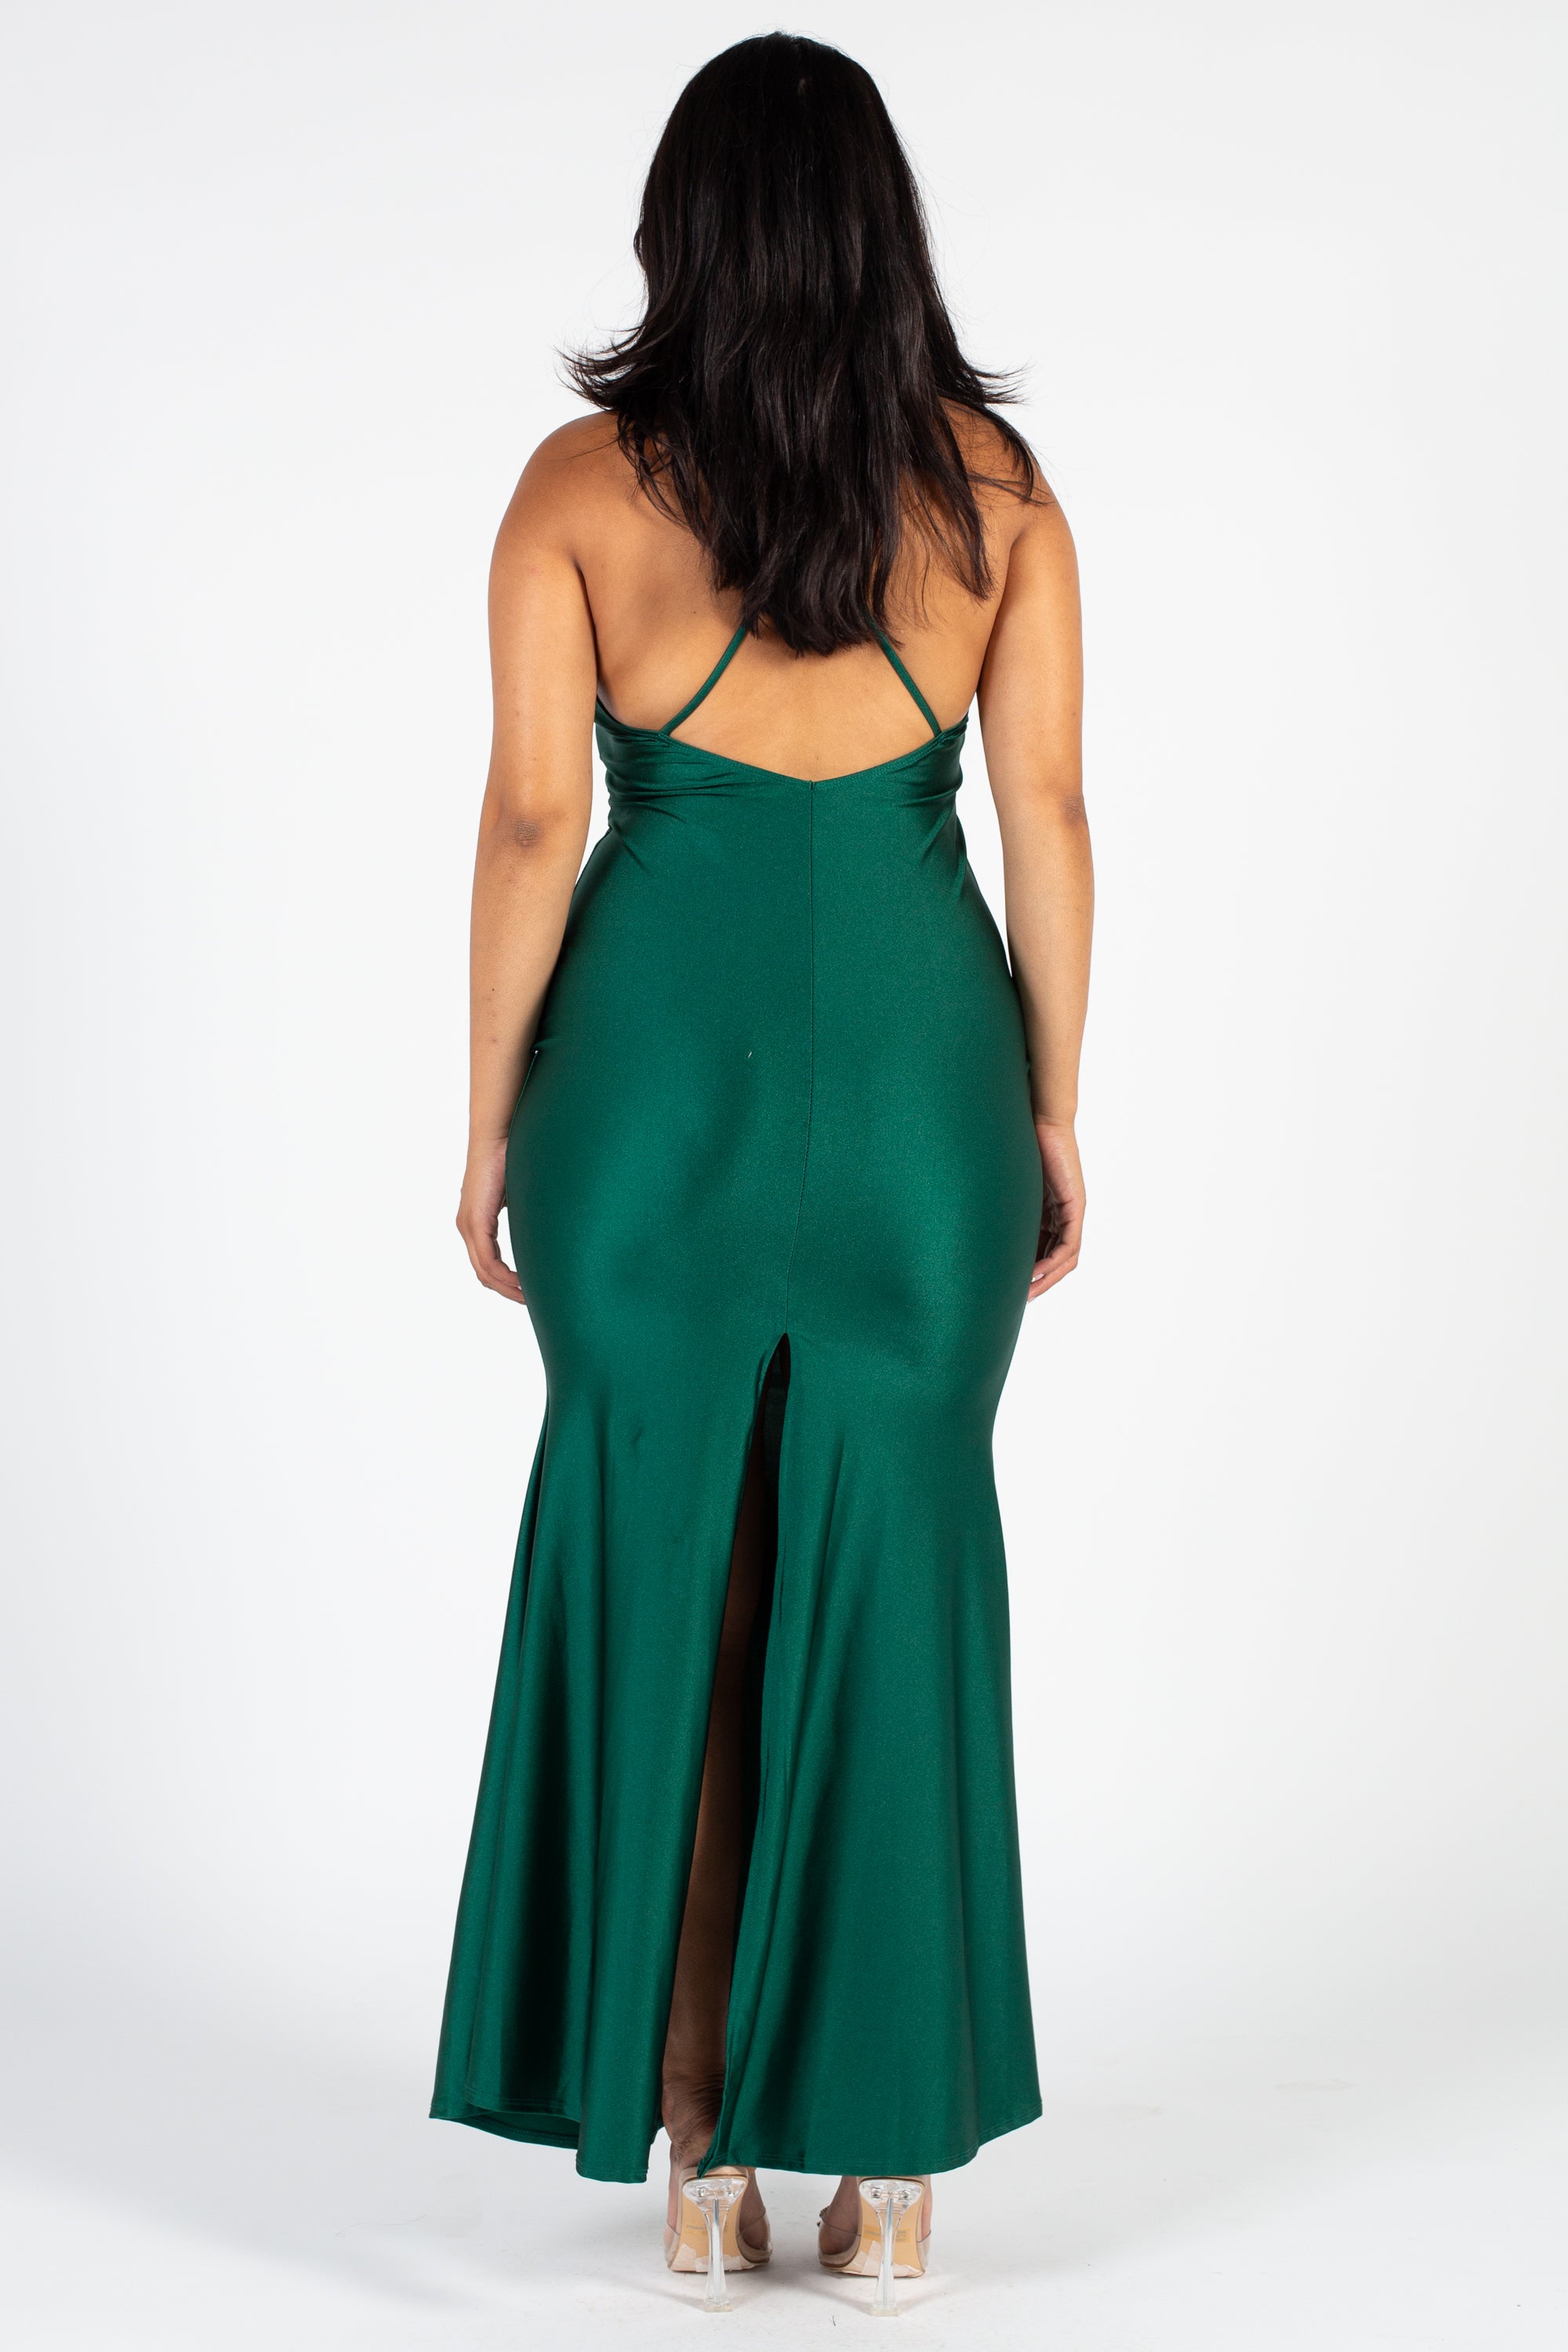 All That Shimmers Mermaid Maxi Dress